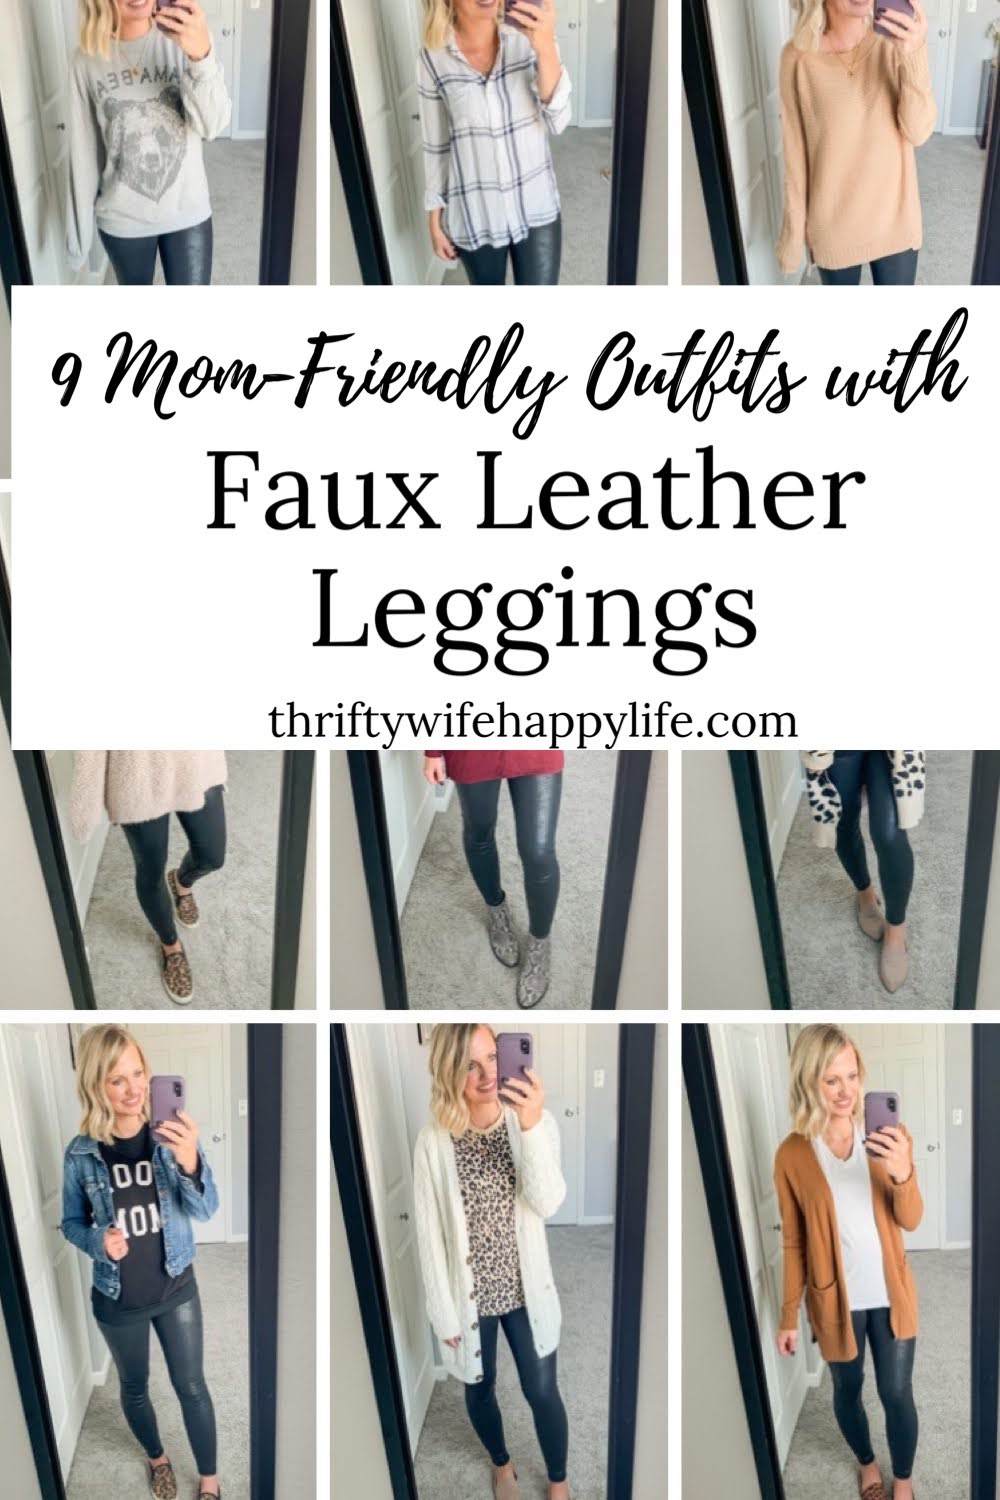 Shop My Style: Comfortable and Casual Long Soft Top with Faux Leather Leggings  Outfit